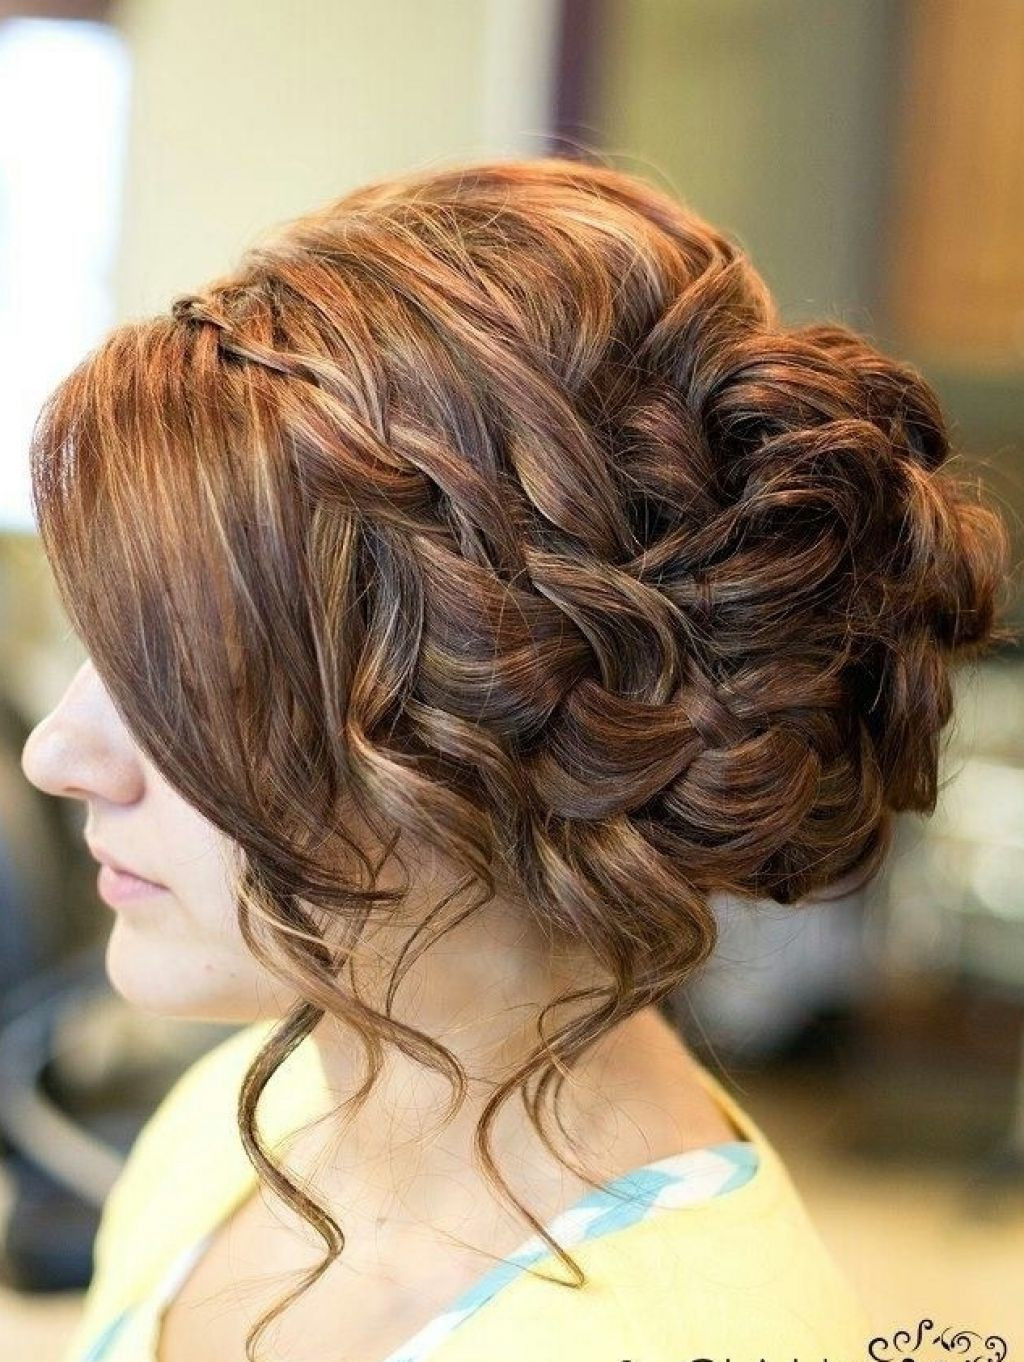 Prom Hairstyles Updos
 14 Prom Hairstyles for Long Hair that are Simply Adorable